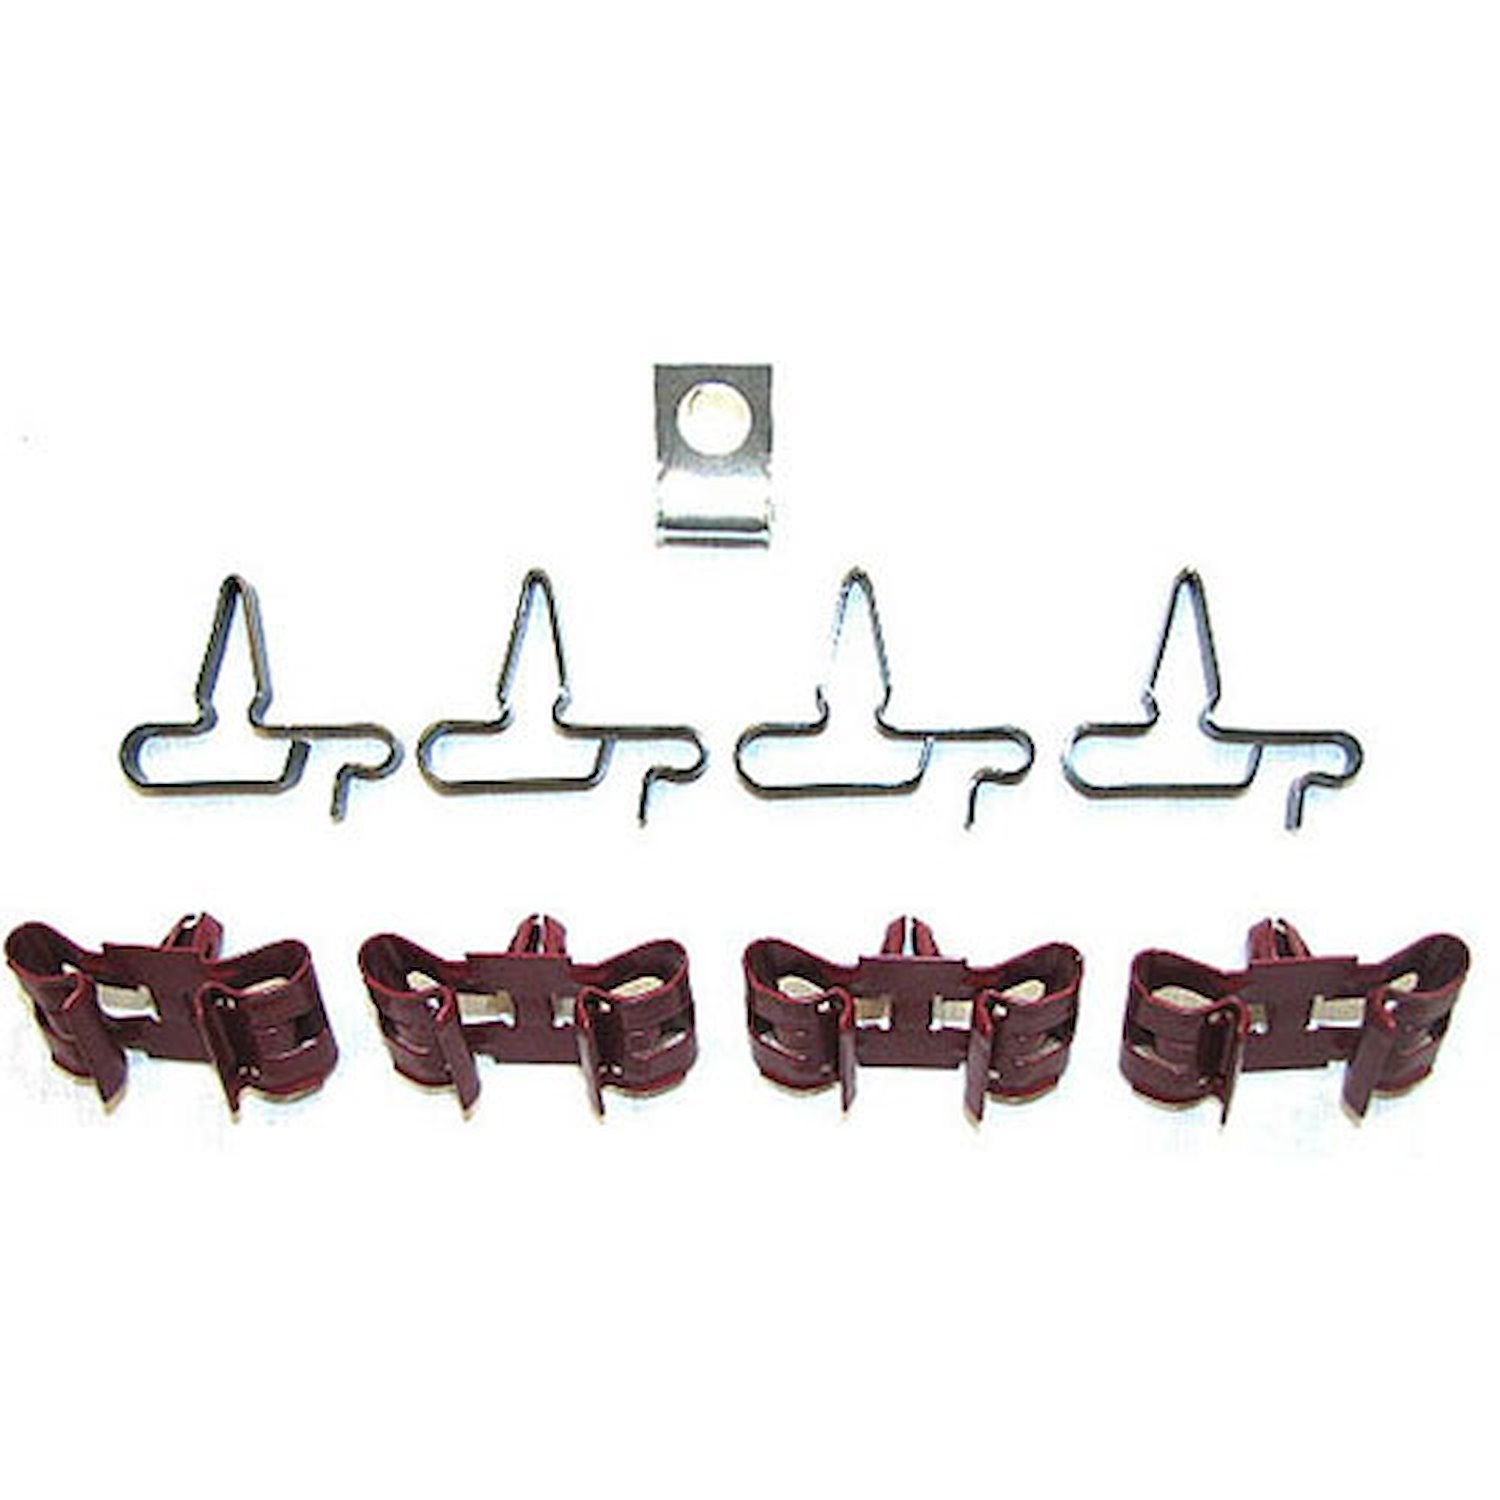 66 -67 Excl. RA AND HO - Brake Line Clips 9 Pcs.